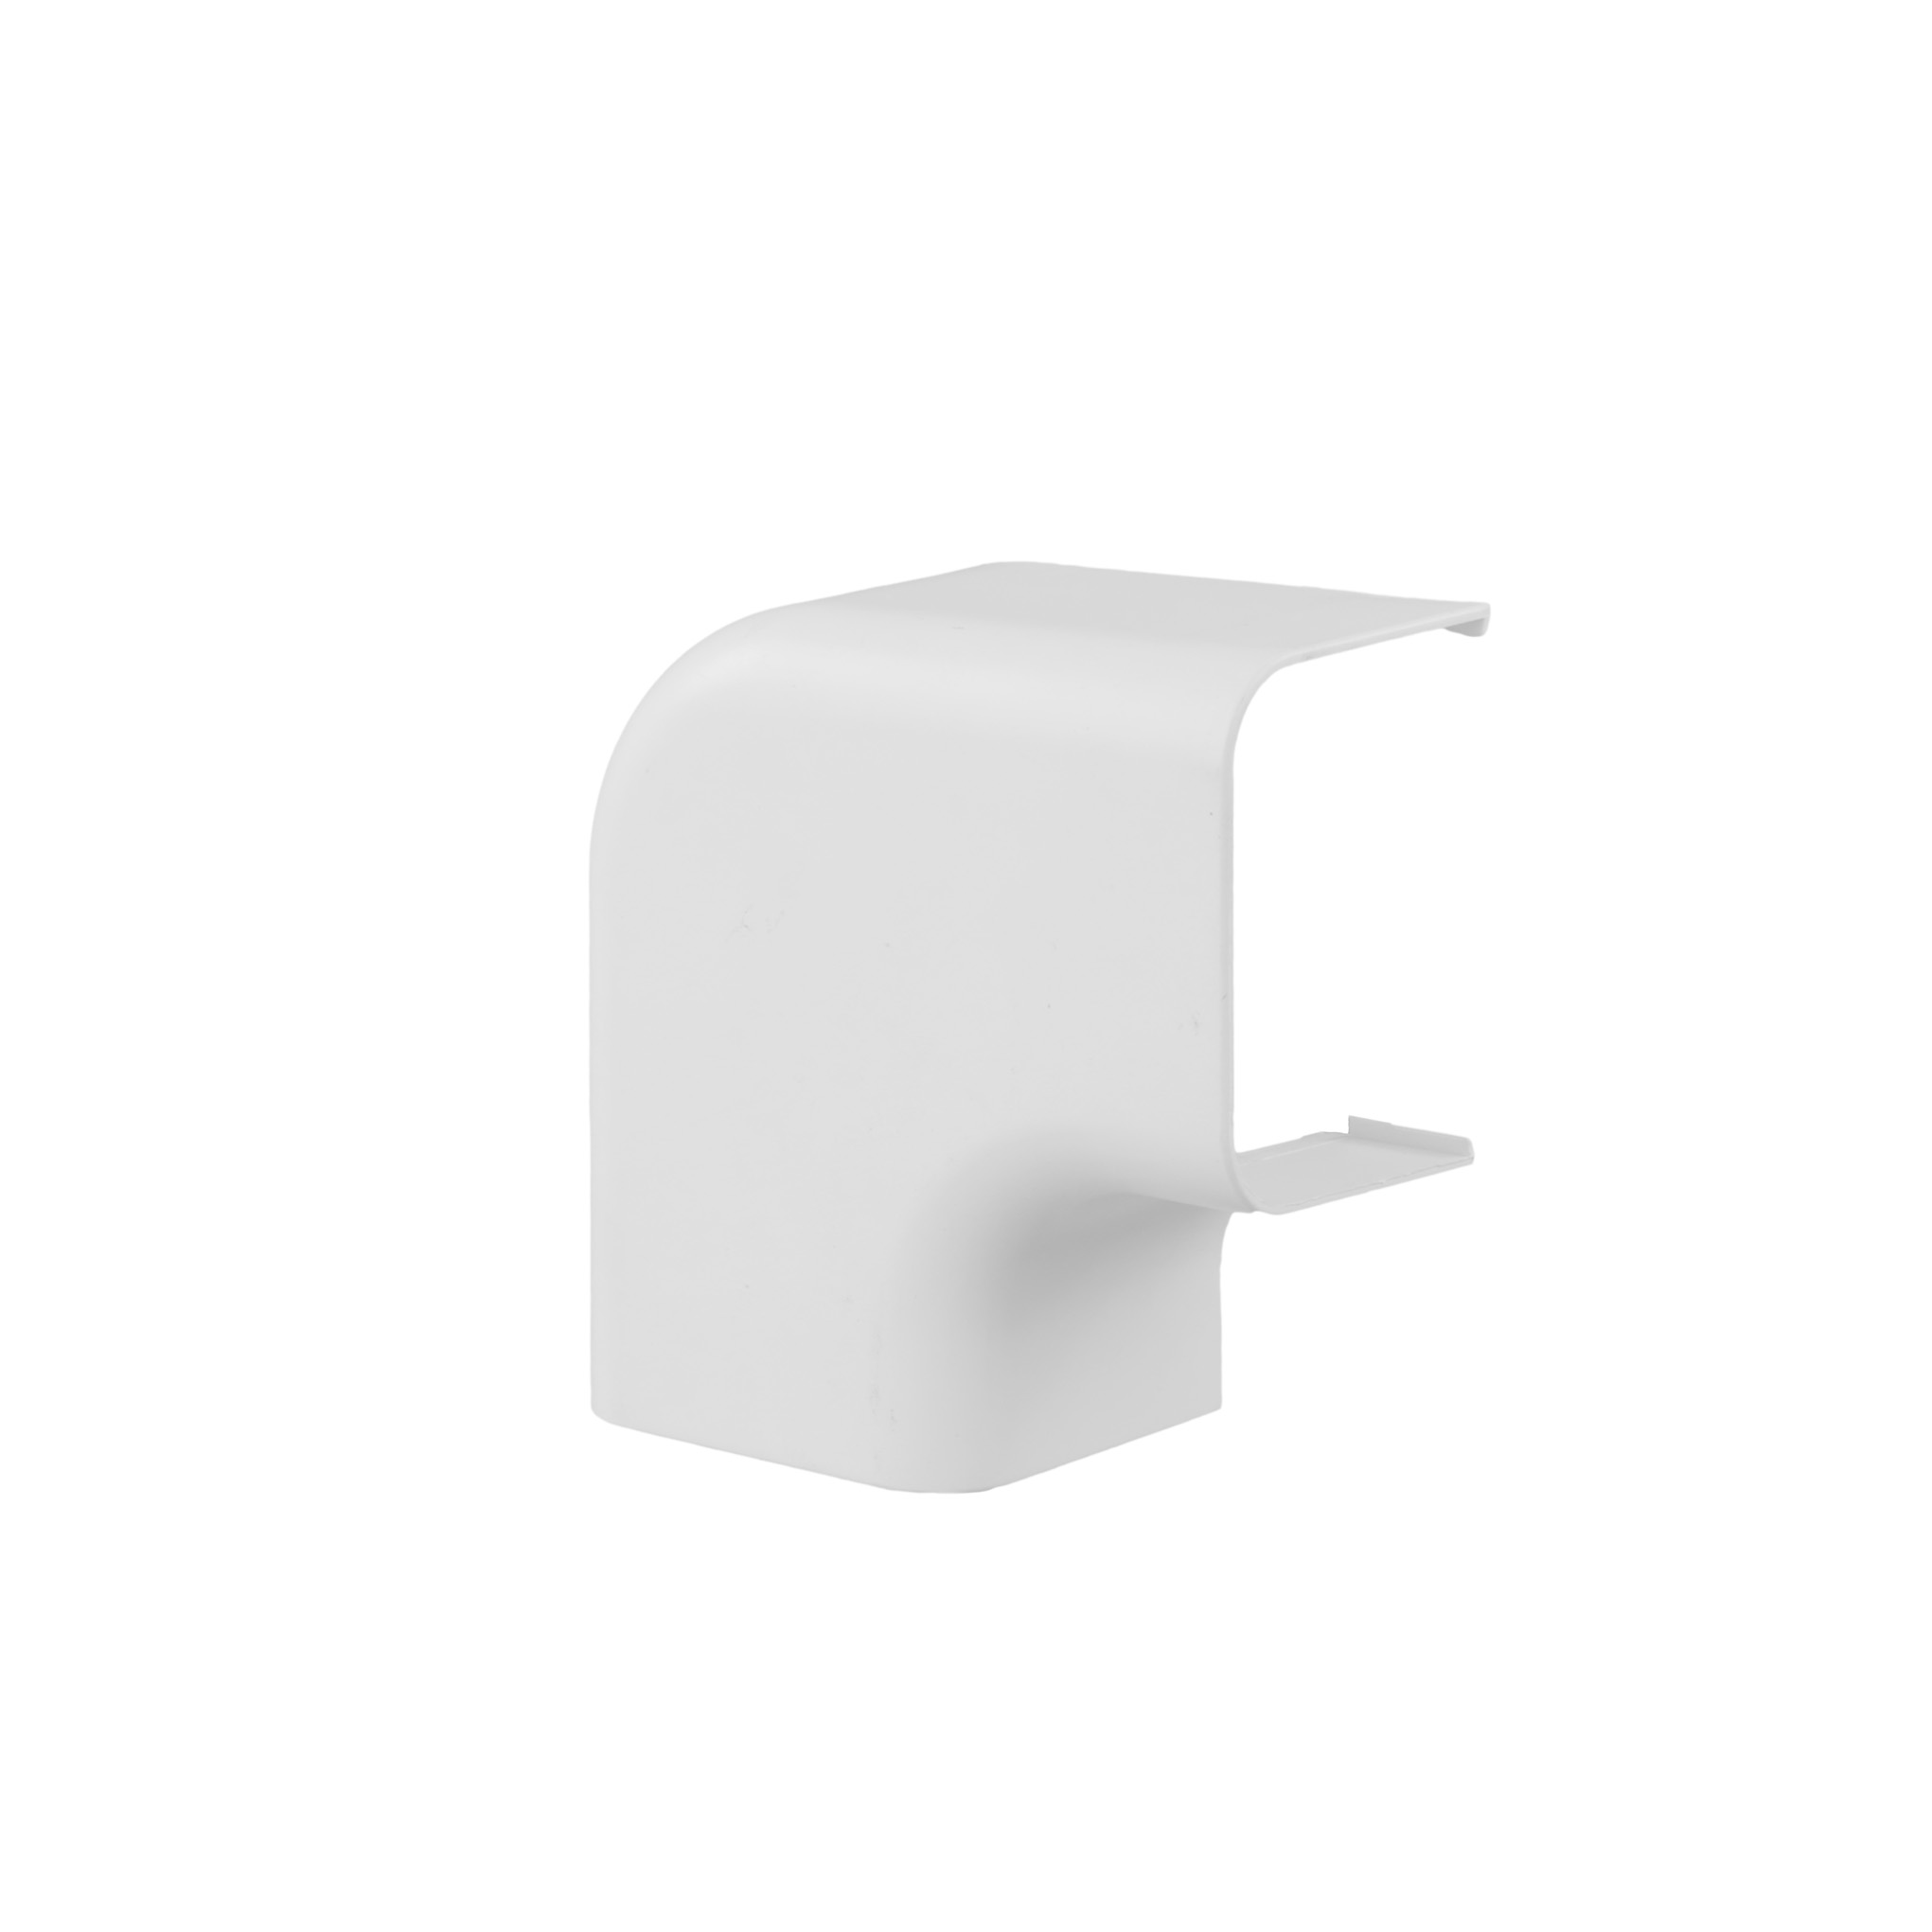 Transition elbow horizontal / vertical 80x60mm